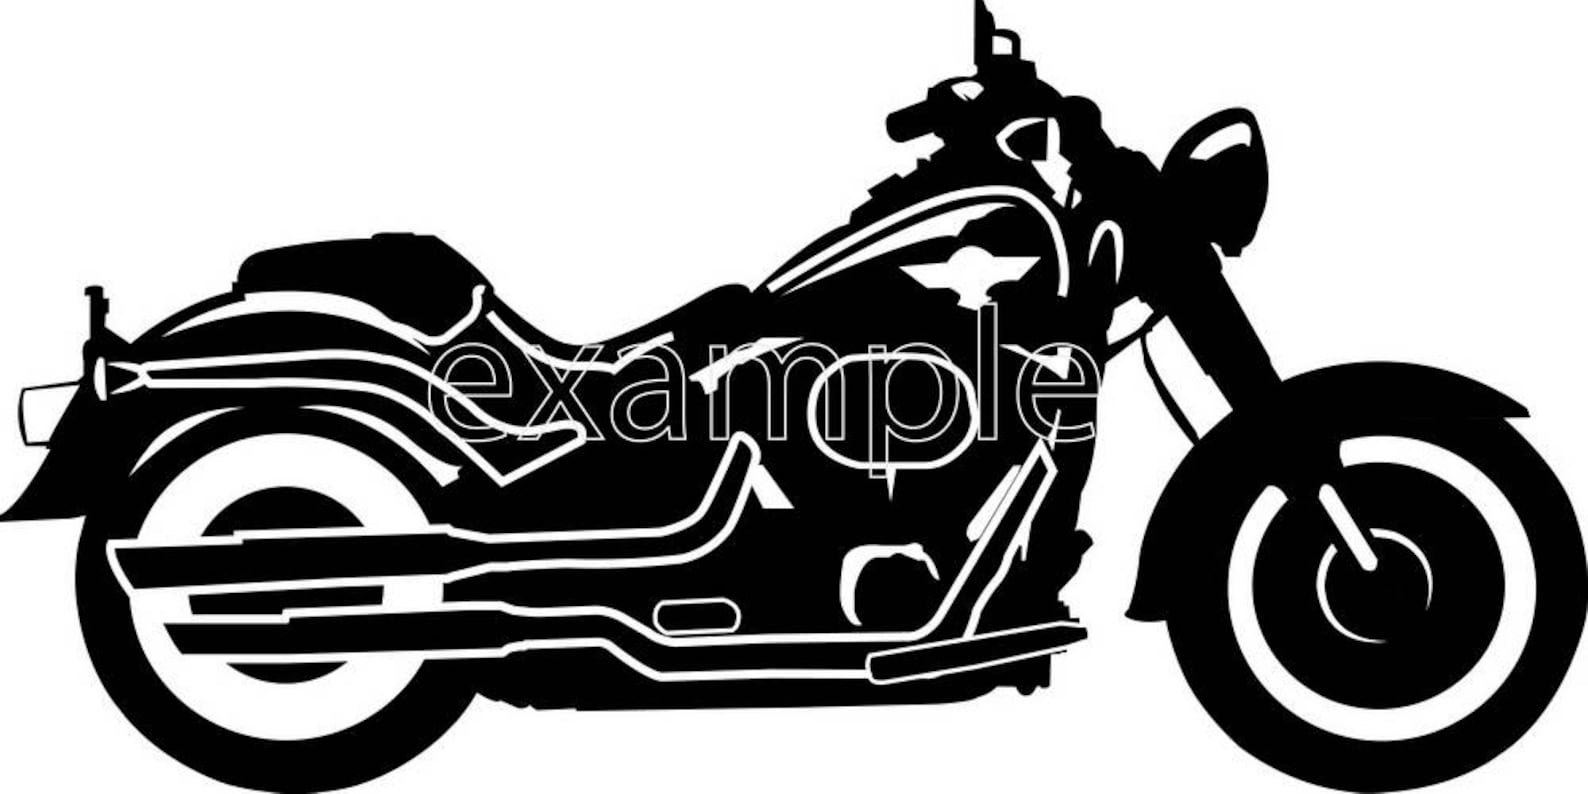 Download Harley clipartmotorcycle svg Eps Dxf files For Silhouette ...